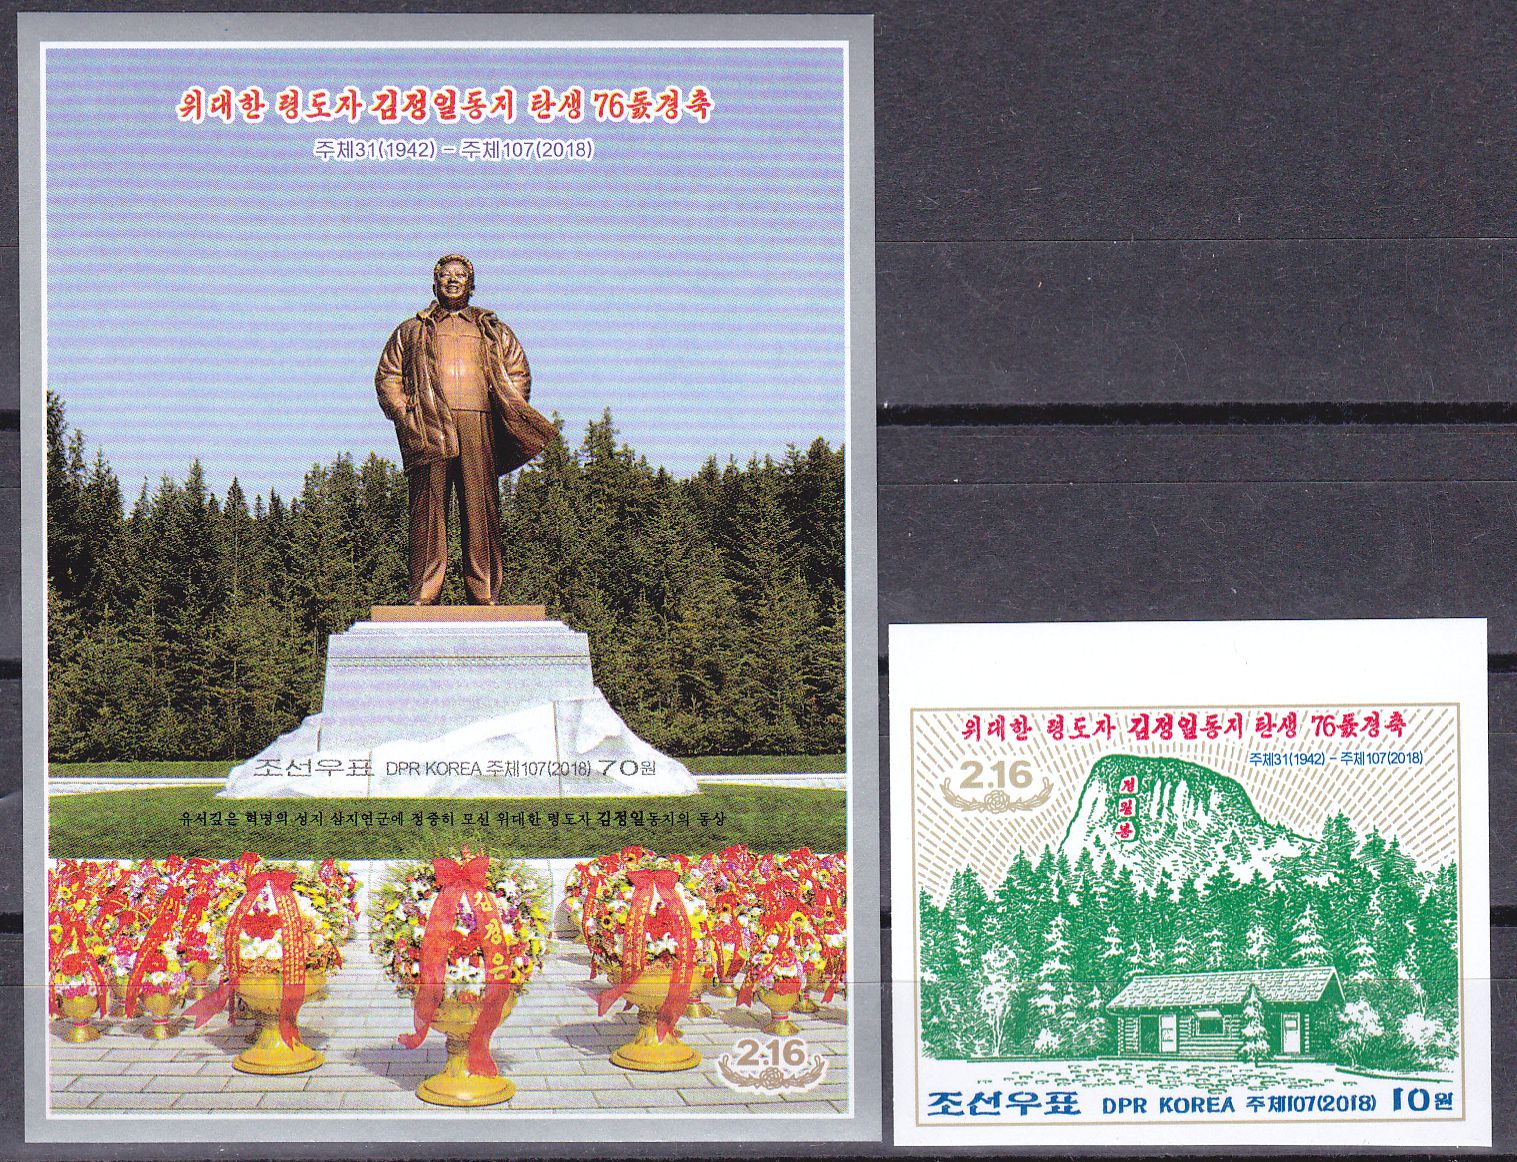 L4446, Korea "76th Anni. of Kim Jong Il", 2 Pcs Imperforate Stamp and SS, 2018